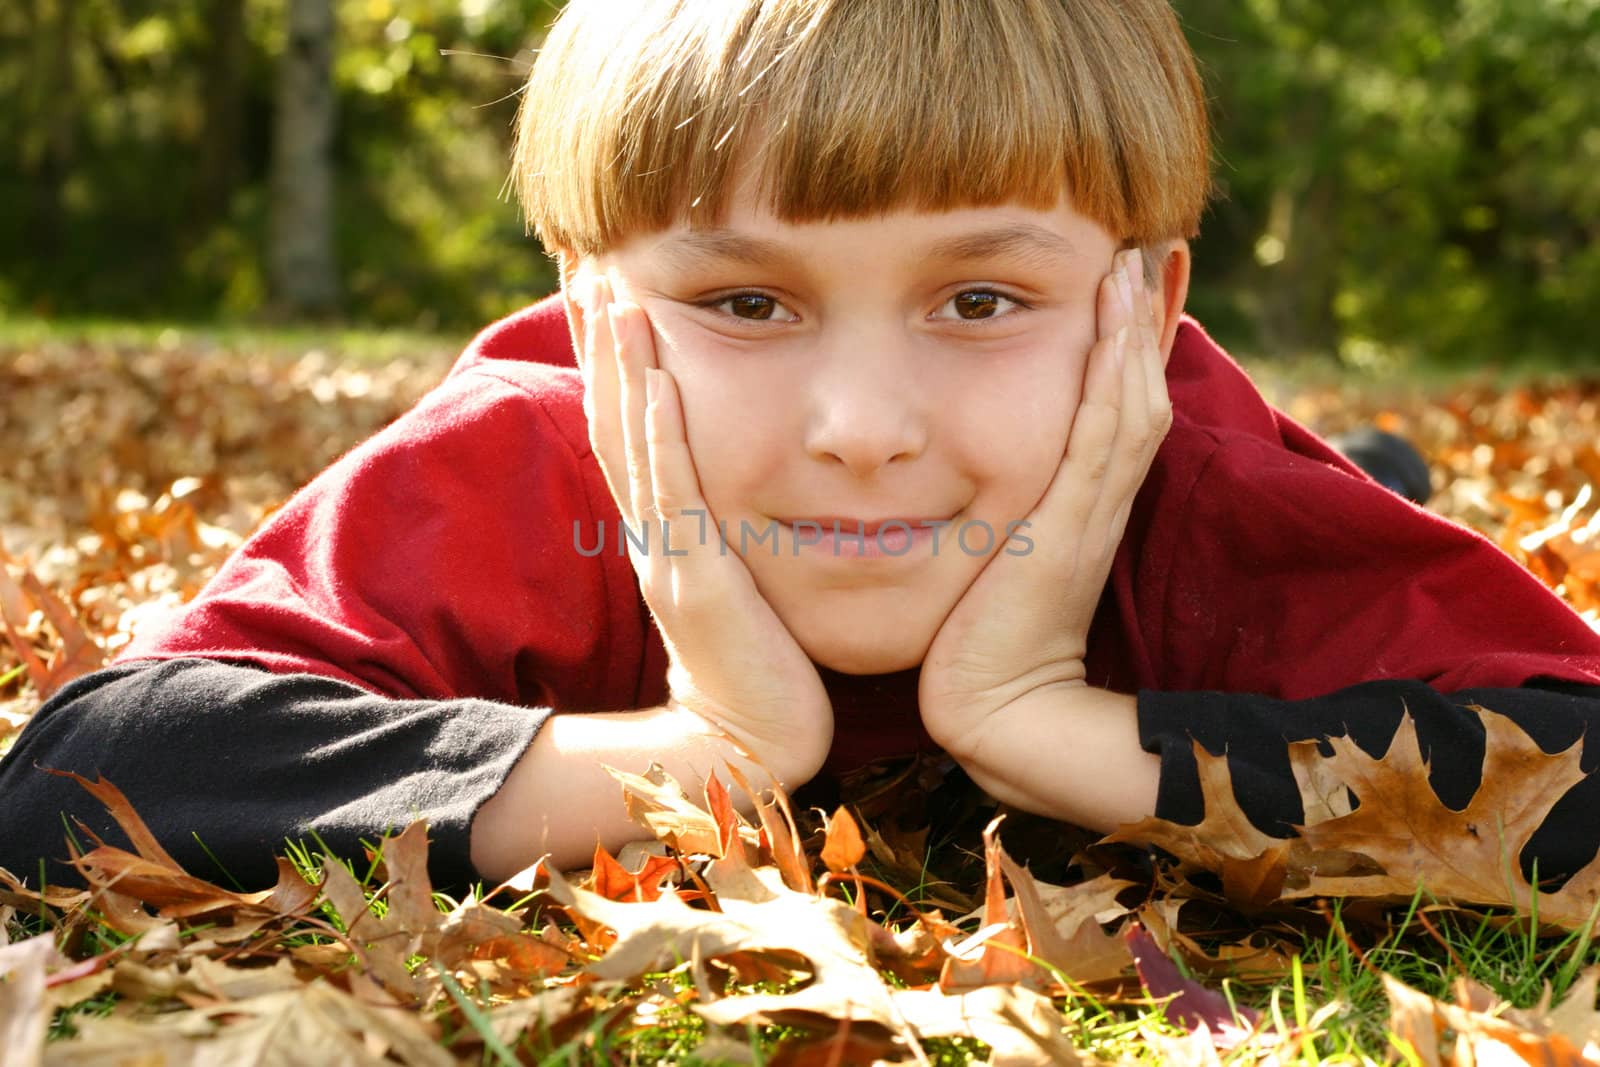 A boy laying in a park with his head in both hands and staring ahead.